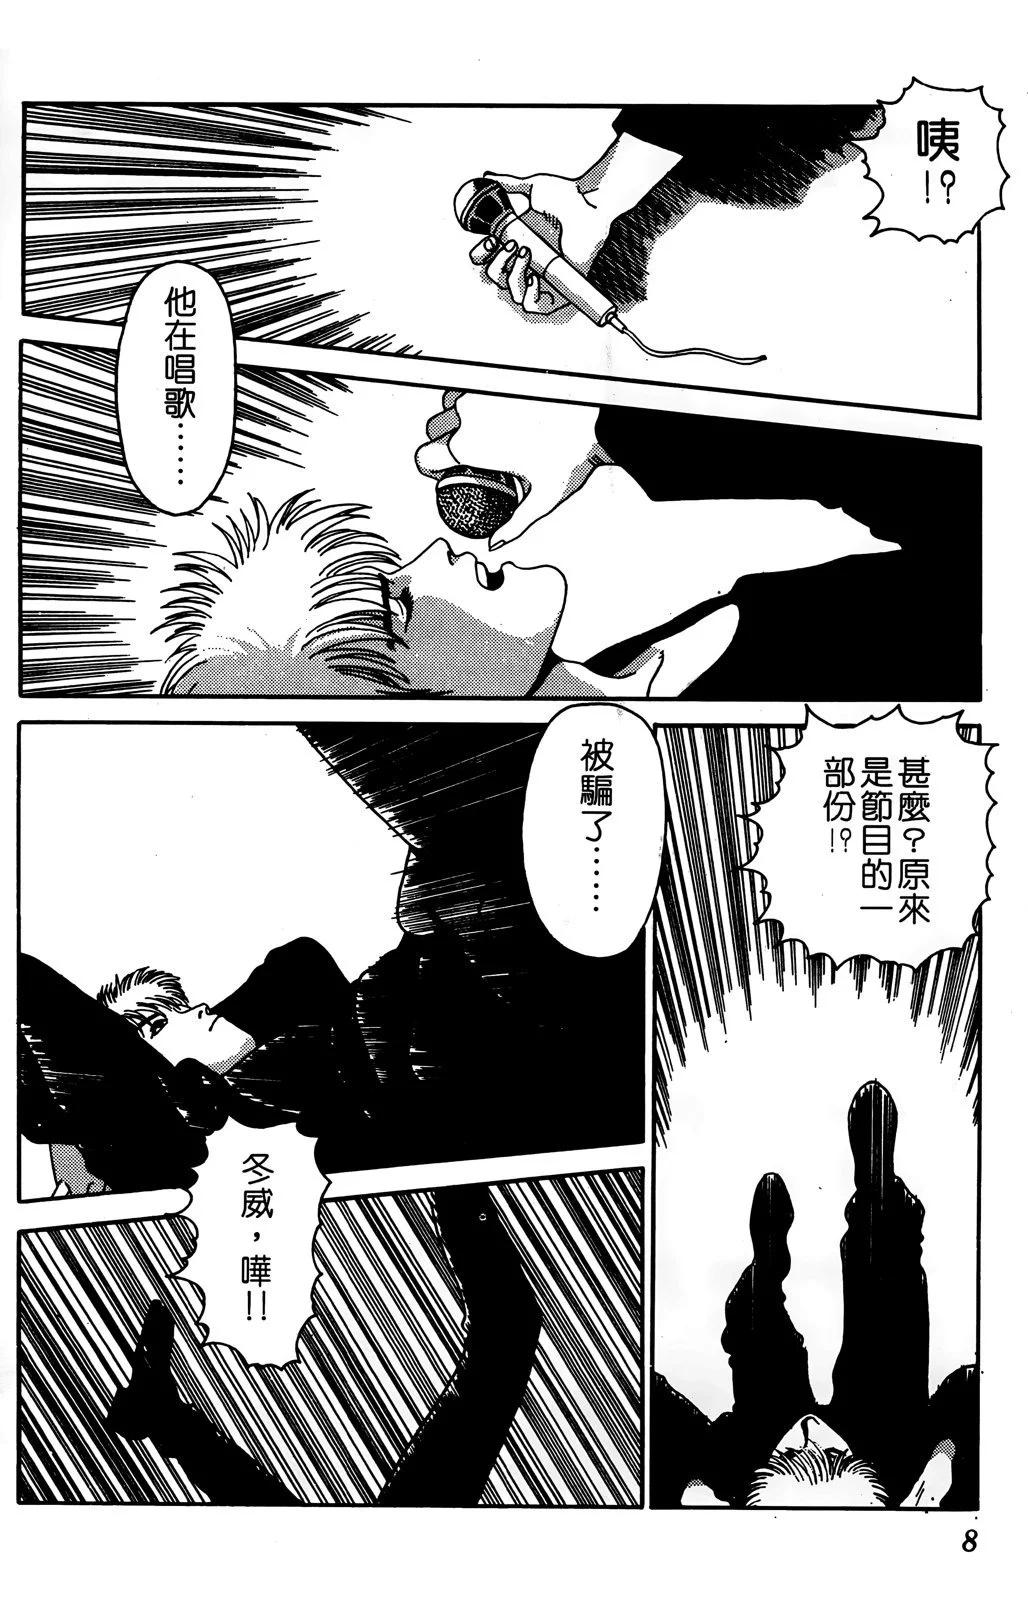 TO-Y - 第10卷(1/4) - 3